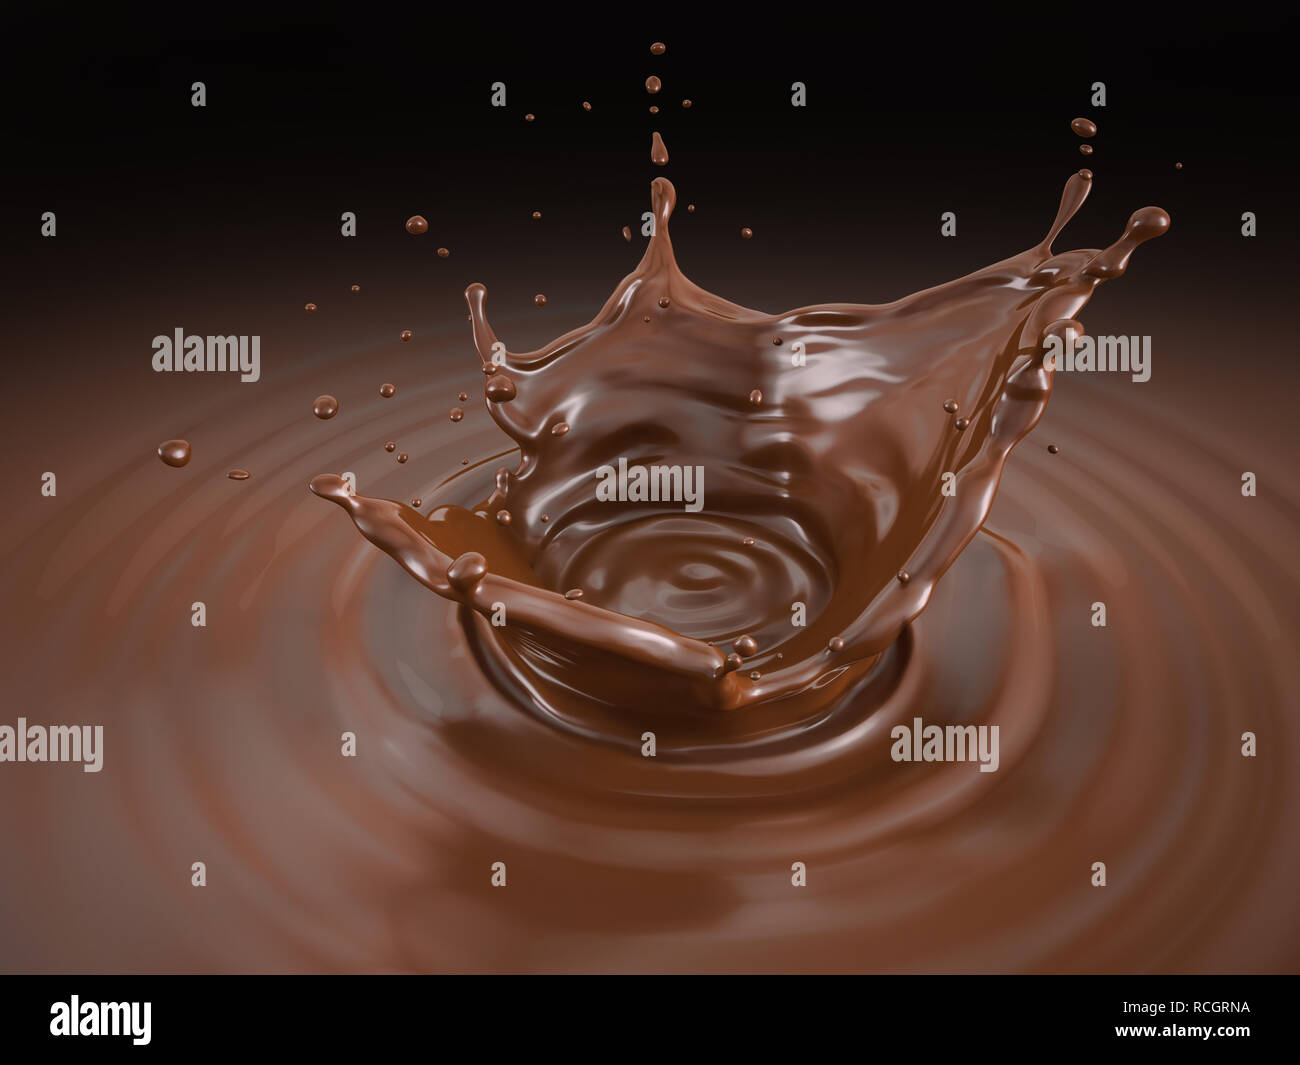 Liquid chocolate crown splash with ripples. Bird eye view. On black background. Clipping path included. Stock Photo